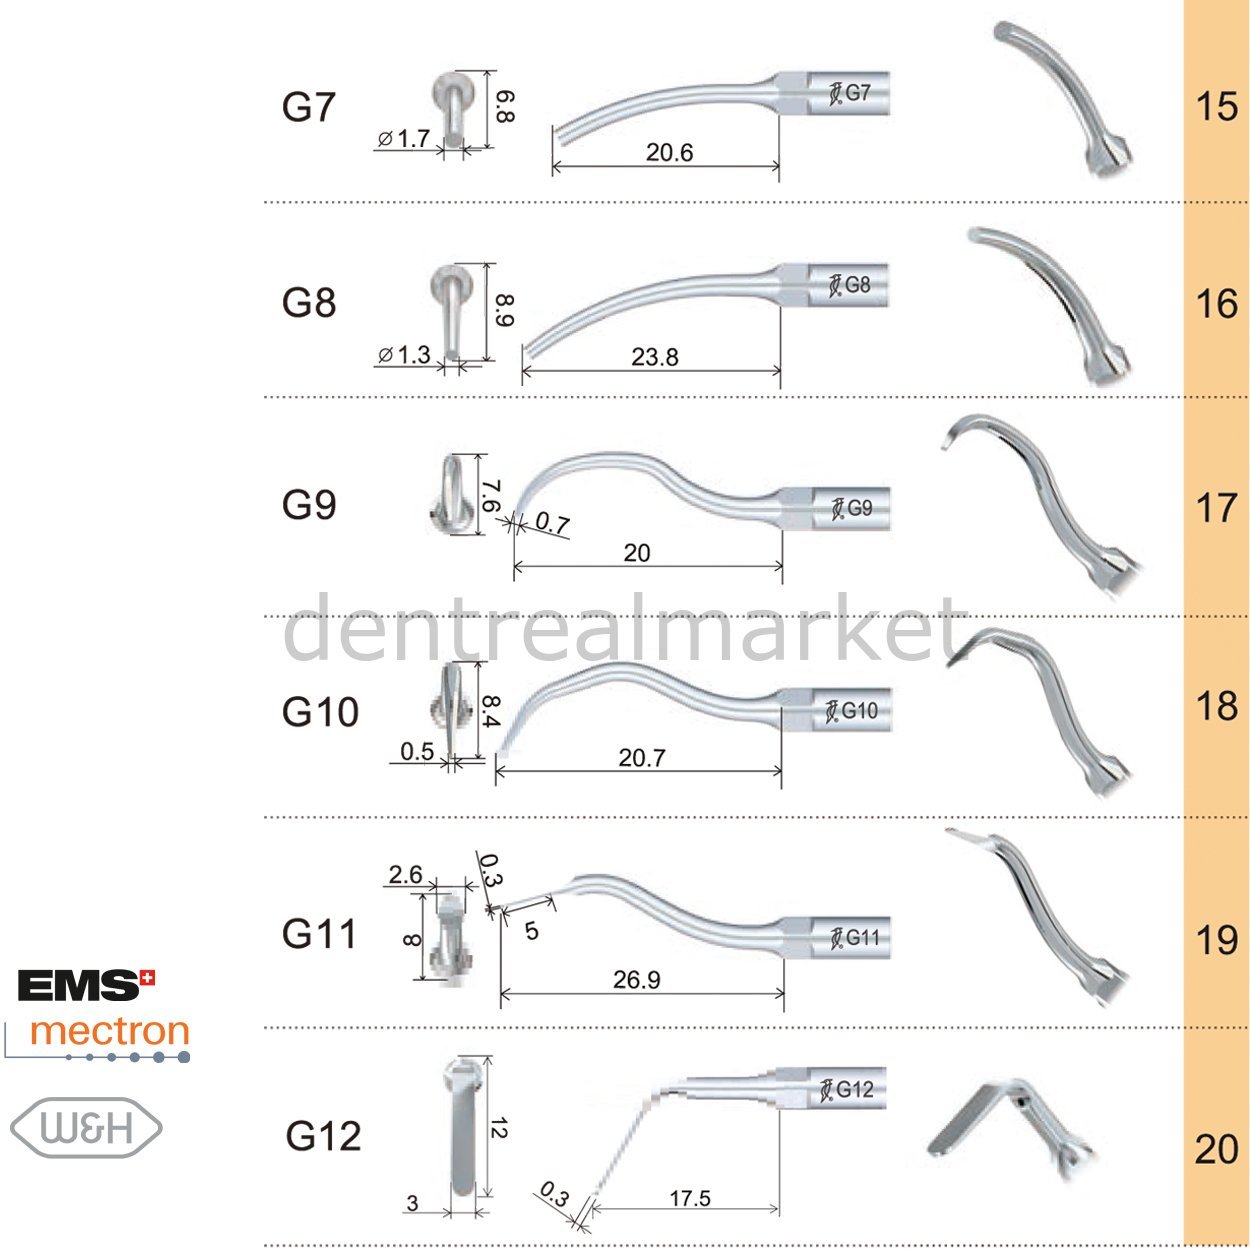 Scaling Ultrasonic Scaler Tips - Ems,Mectron,Woodpecker,WH Compatible